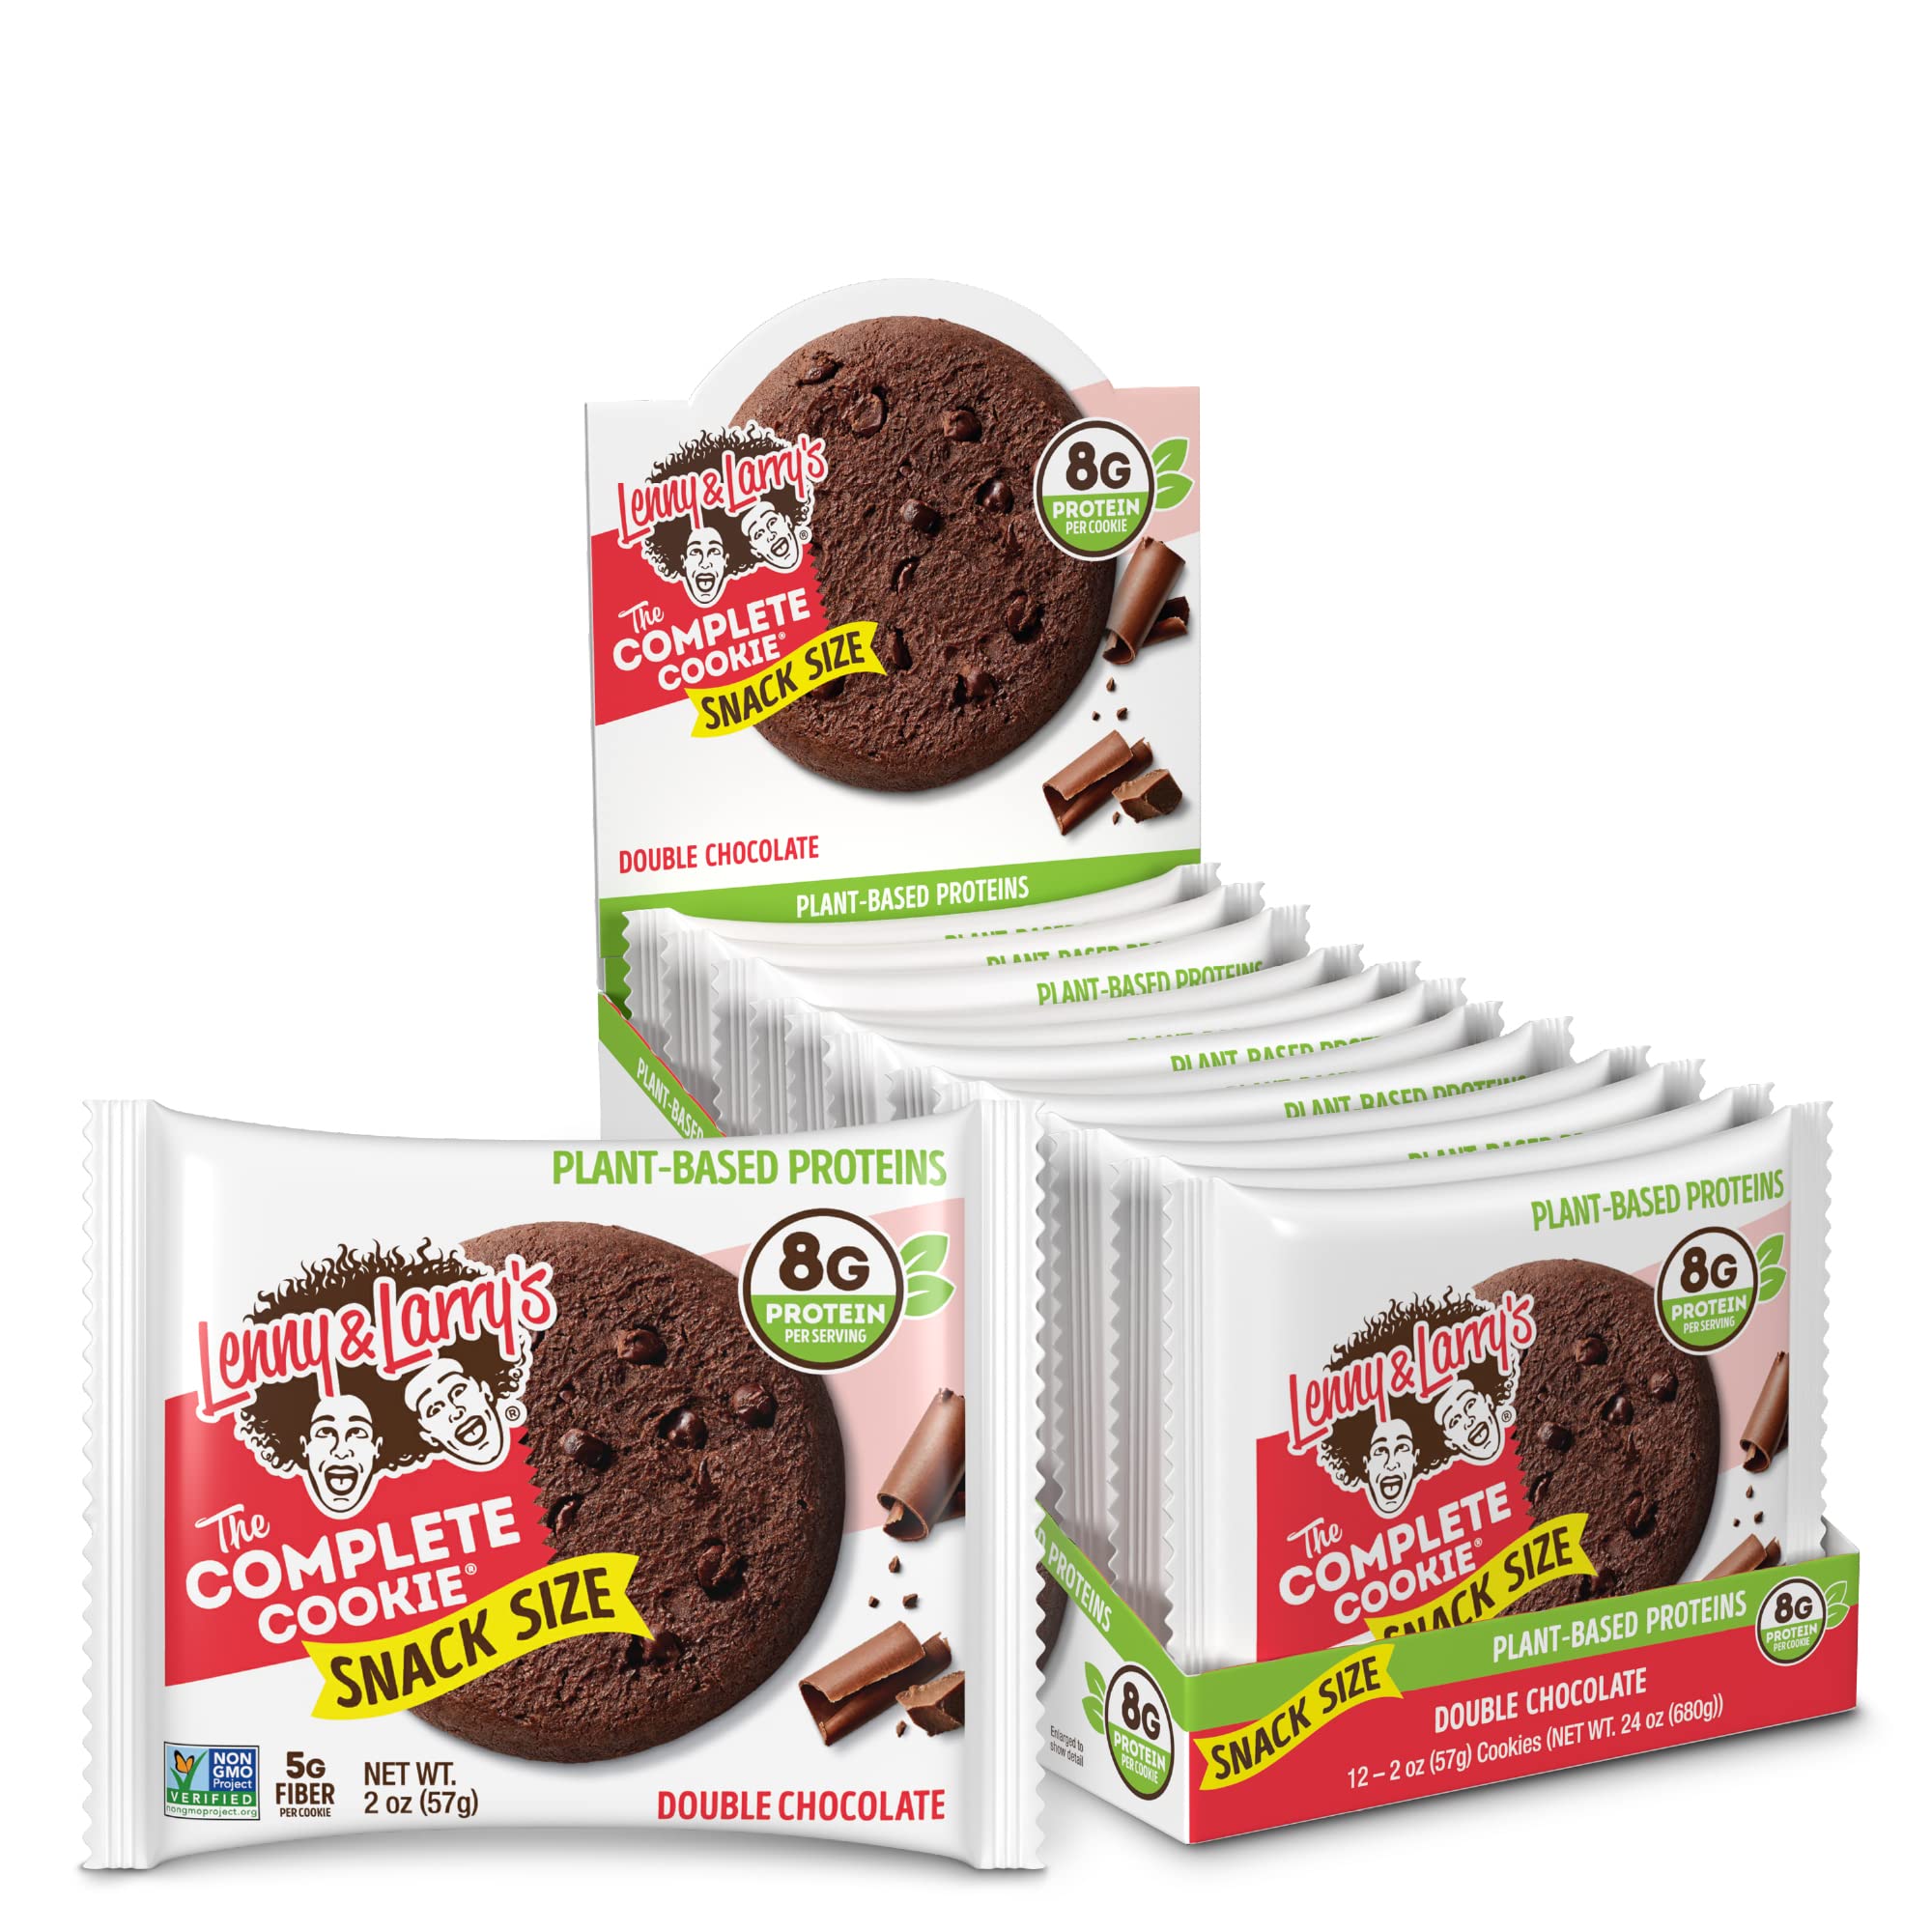 Lenny & Larry's The Complete Cookie, Double Chocolate, Soft Baked, 8g Plant Protein, Vegan, Non-GMO, 2 Ounce (Pack of 12)